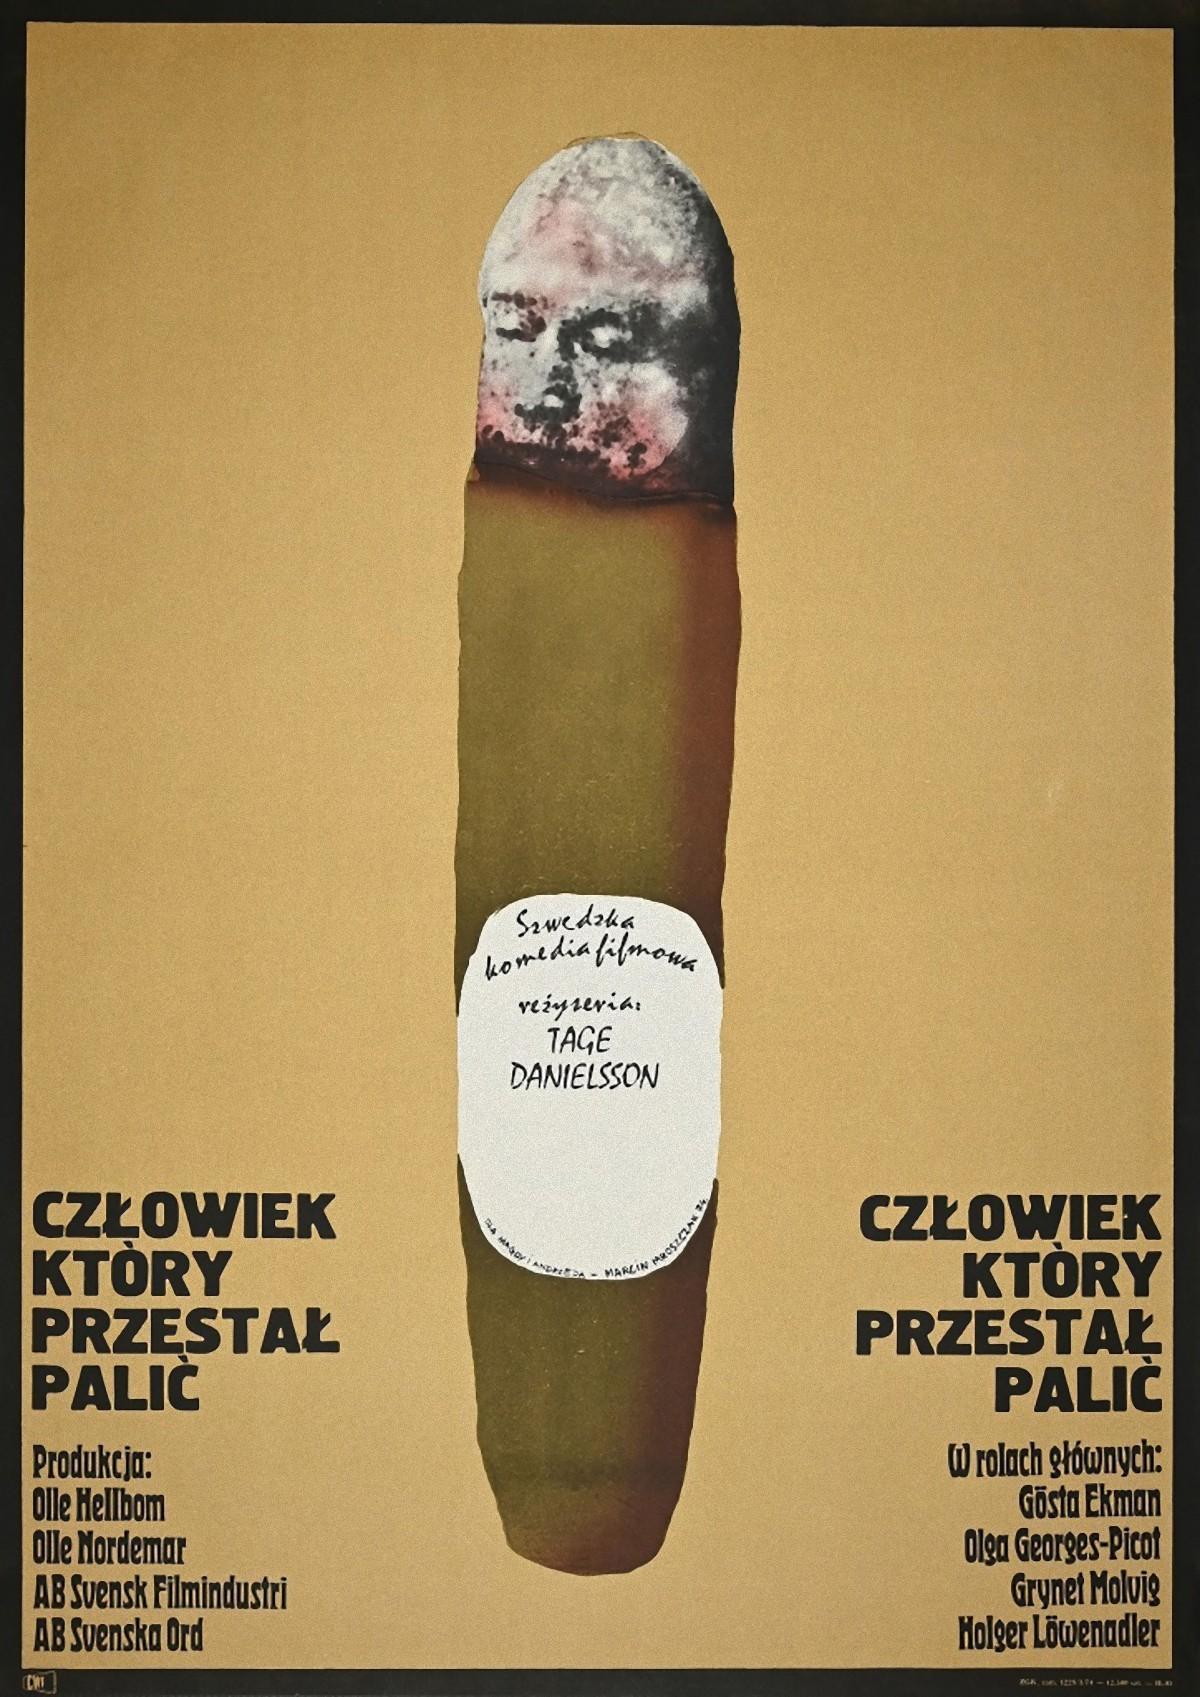 Tage Danielsson is an original poster realized by Marcin Jan Mroszczak (Katowice, 1950) in 1974.

Good condition.

Hand-signed and dated.

Marcin Jan Mroszczak (born January 10, 1950 in Katowice ) - one of the founders and co-owner of the Corporate